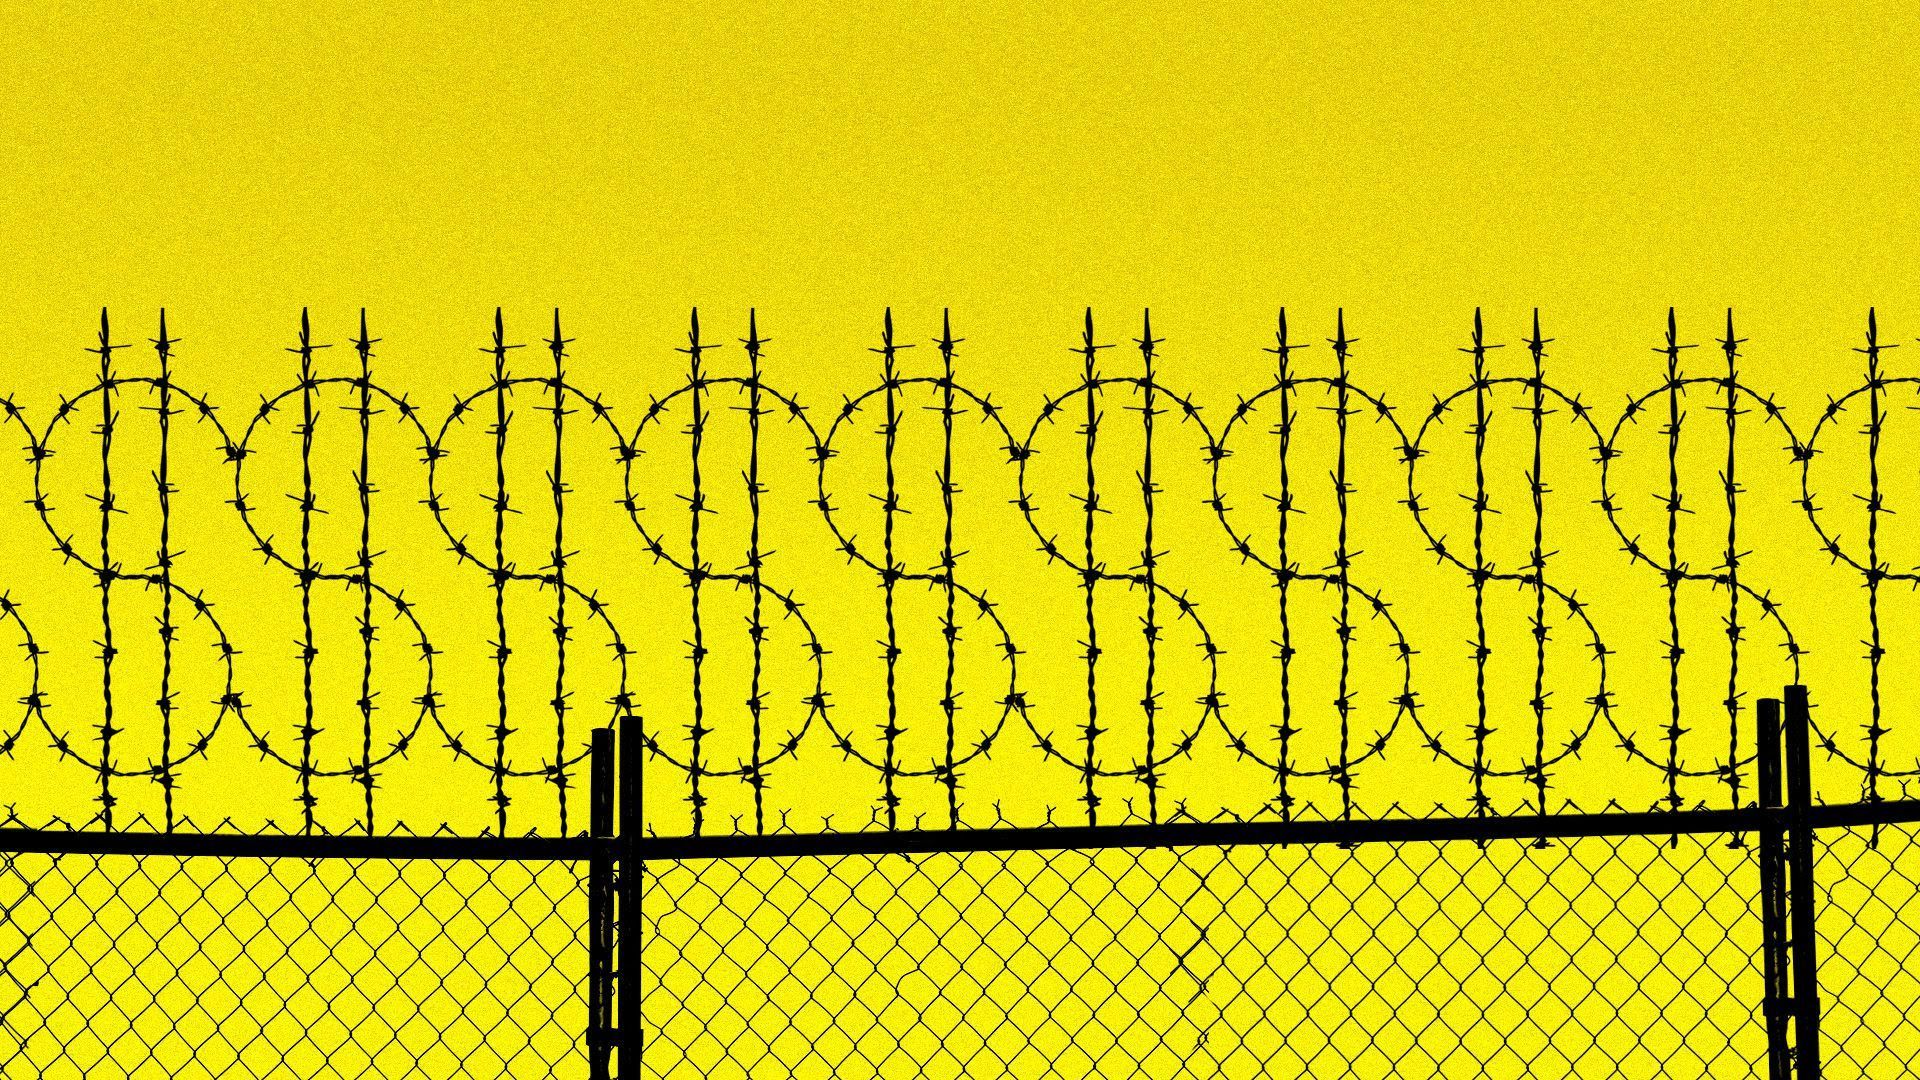 Illustration of a prison fence with the fence shaped into dollar signs.